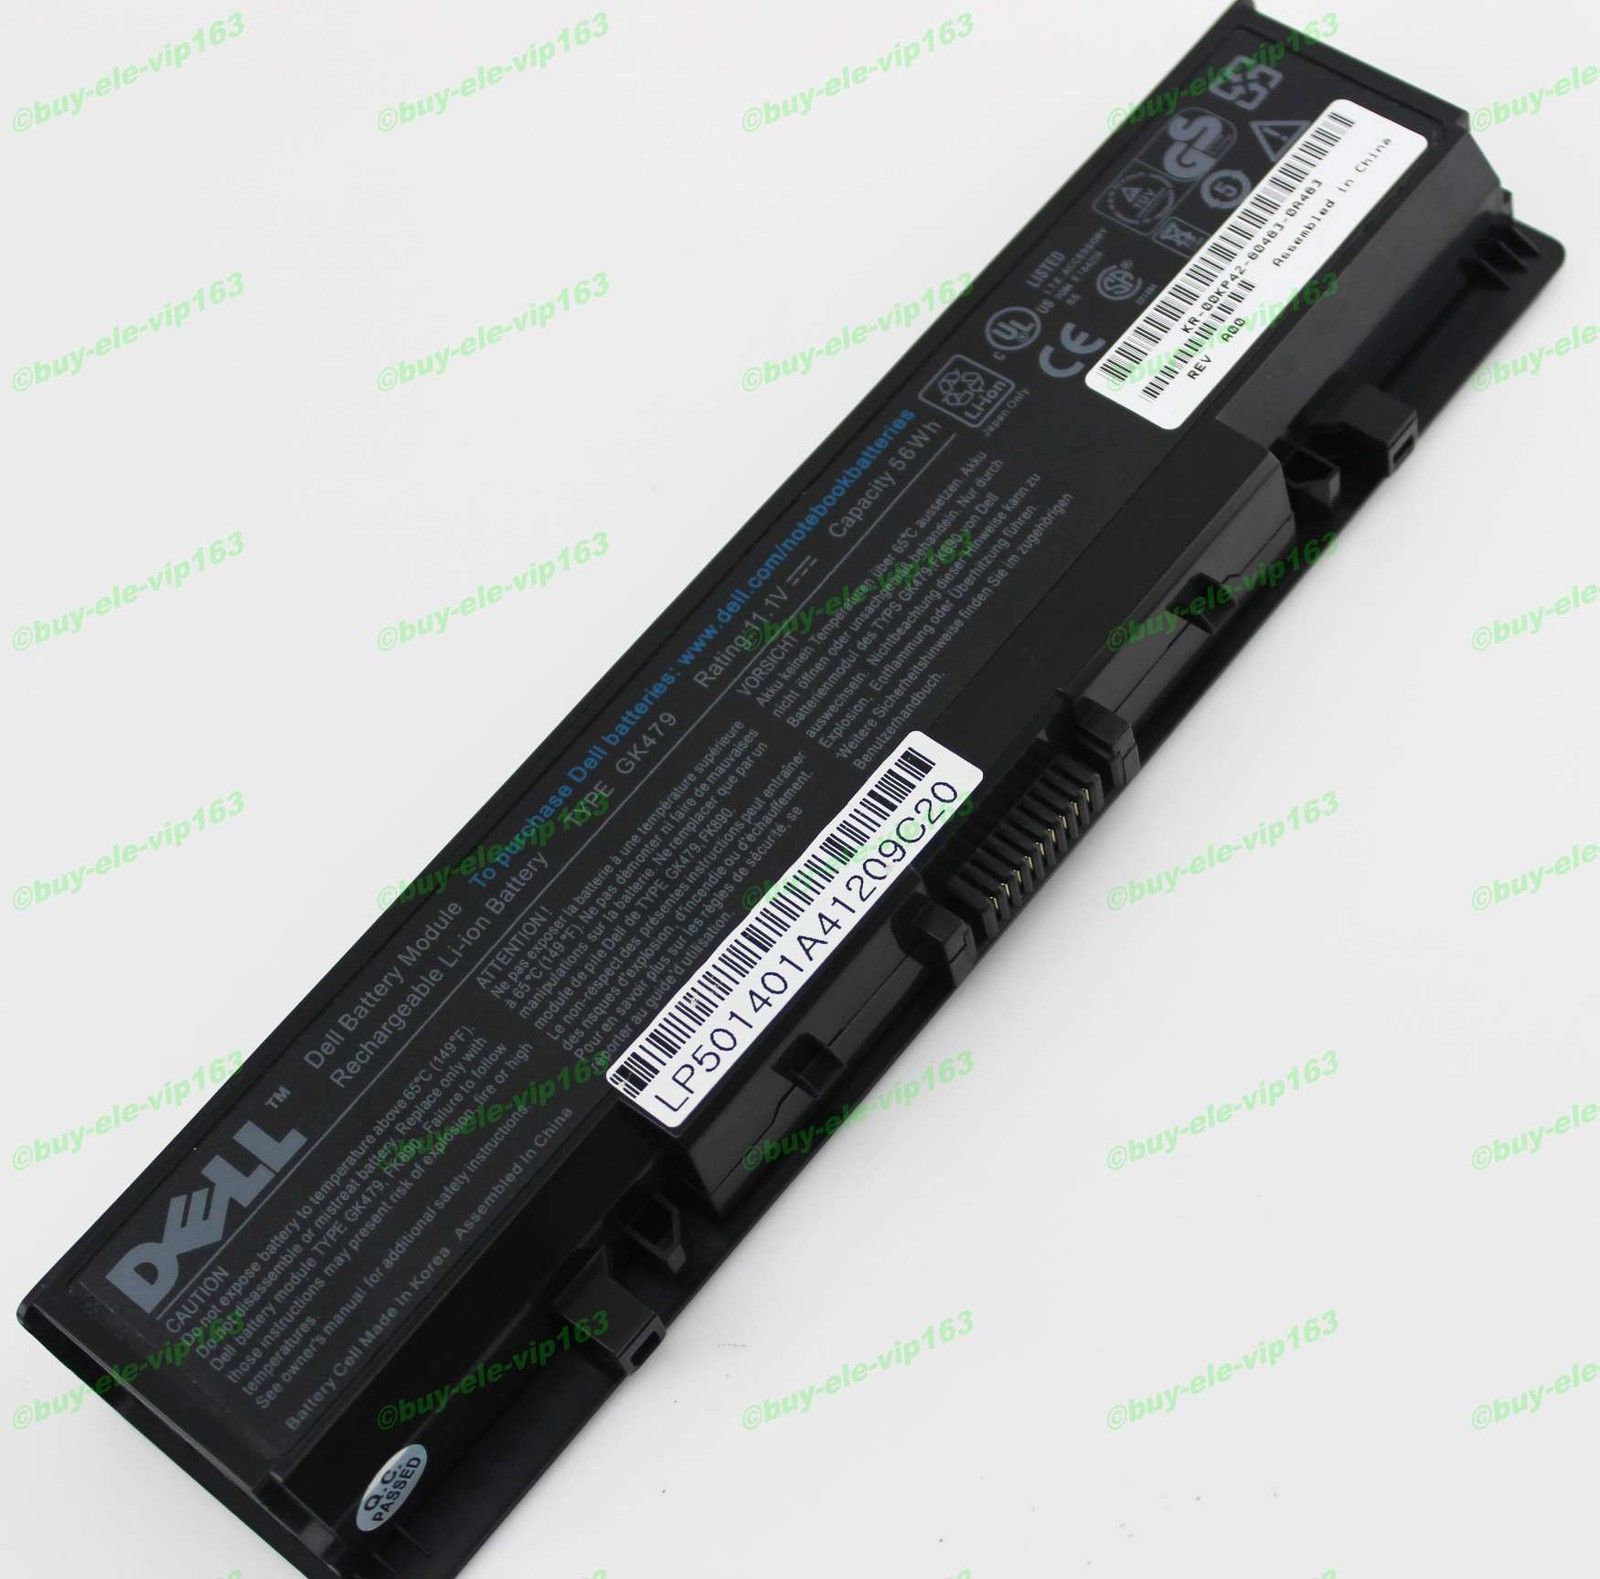 /img/product/pin-laptop-dell-inspiron-1520-1521-1720-1721-vostro-1500-1700-saclaptop-1.jpeg